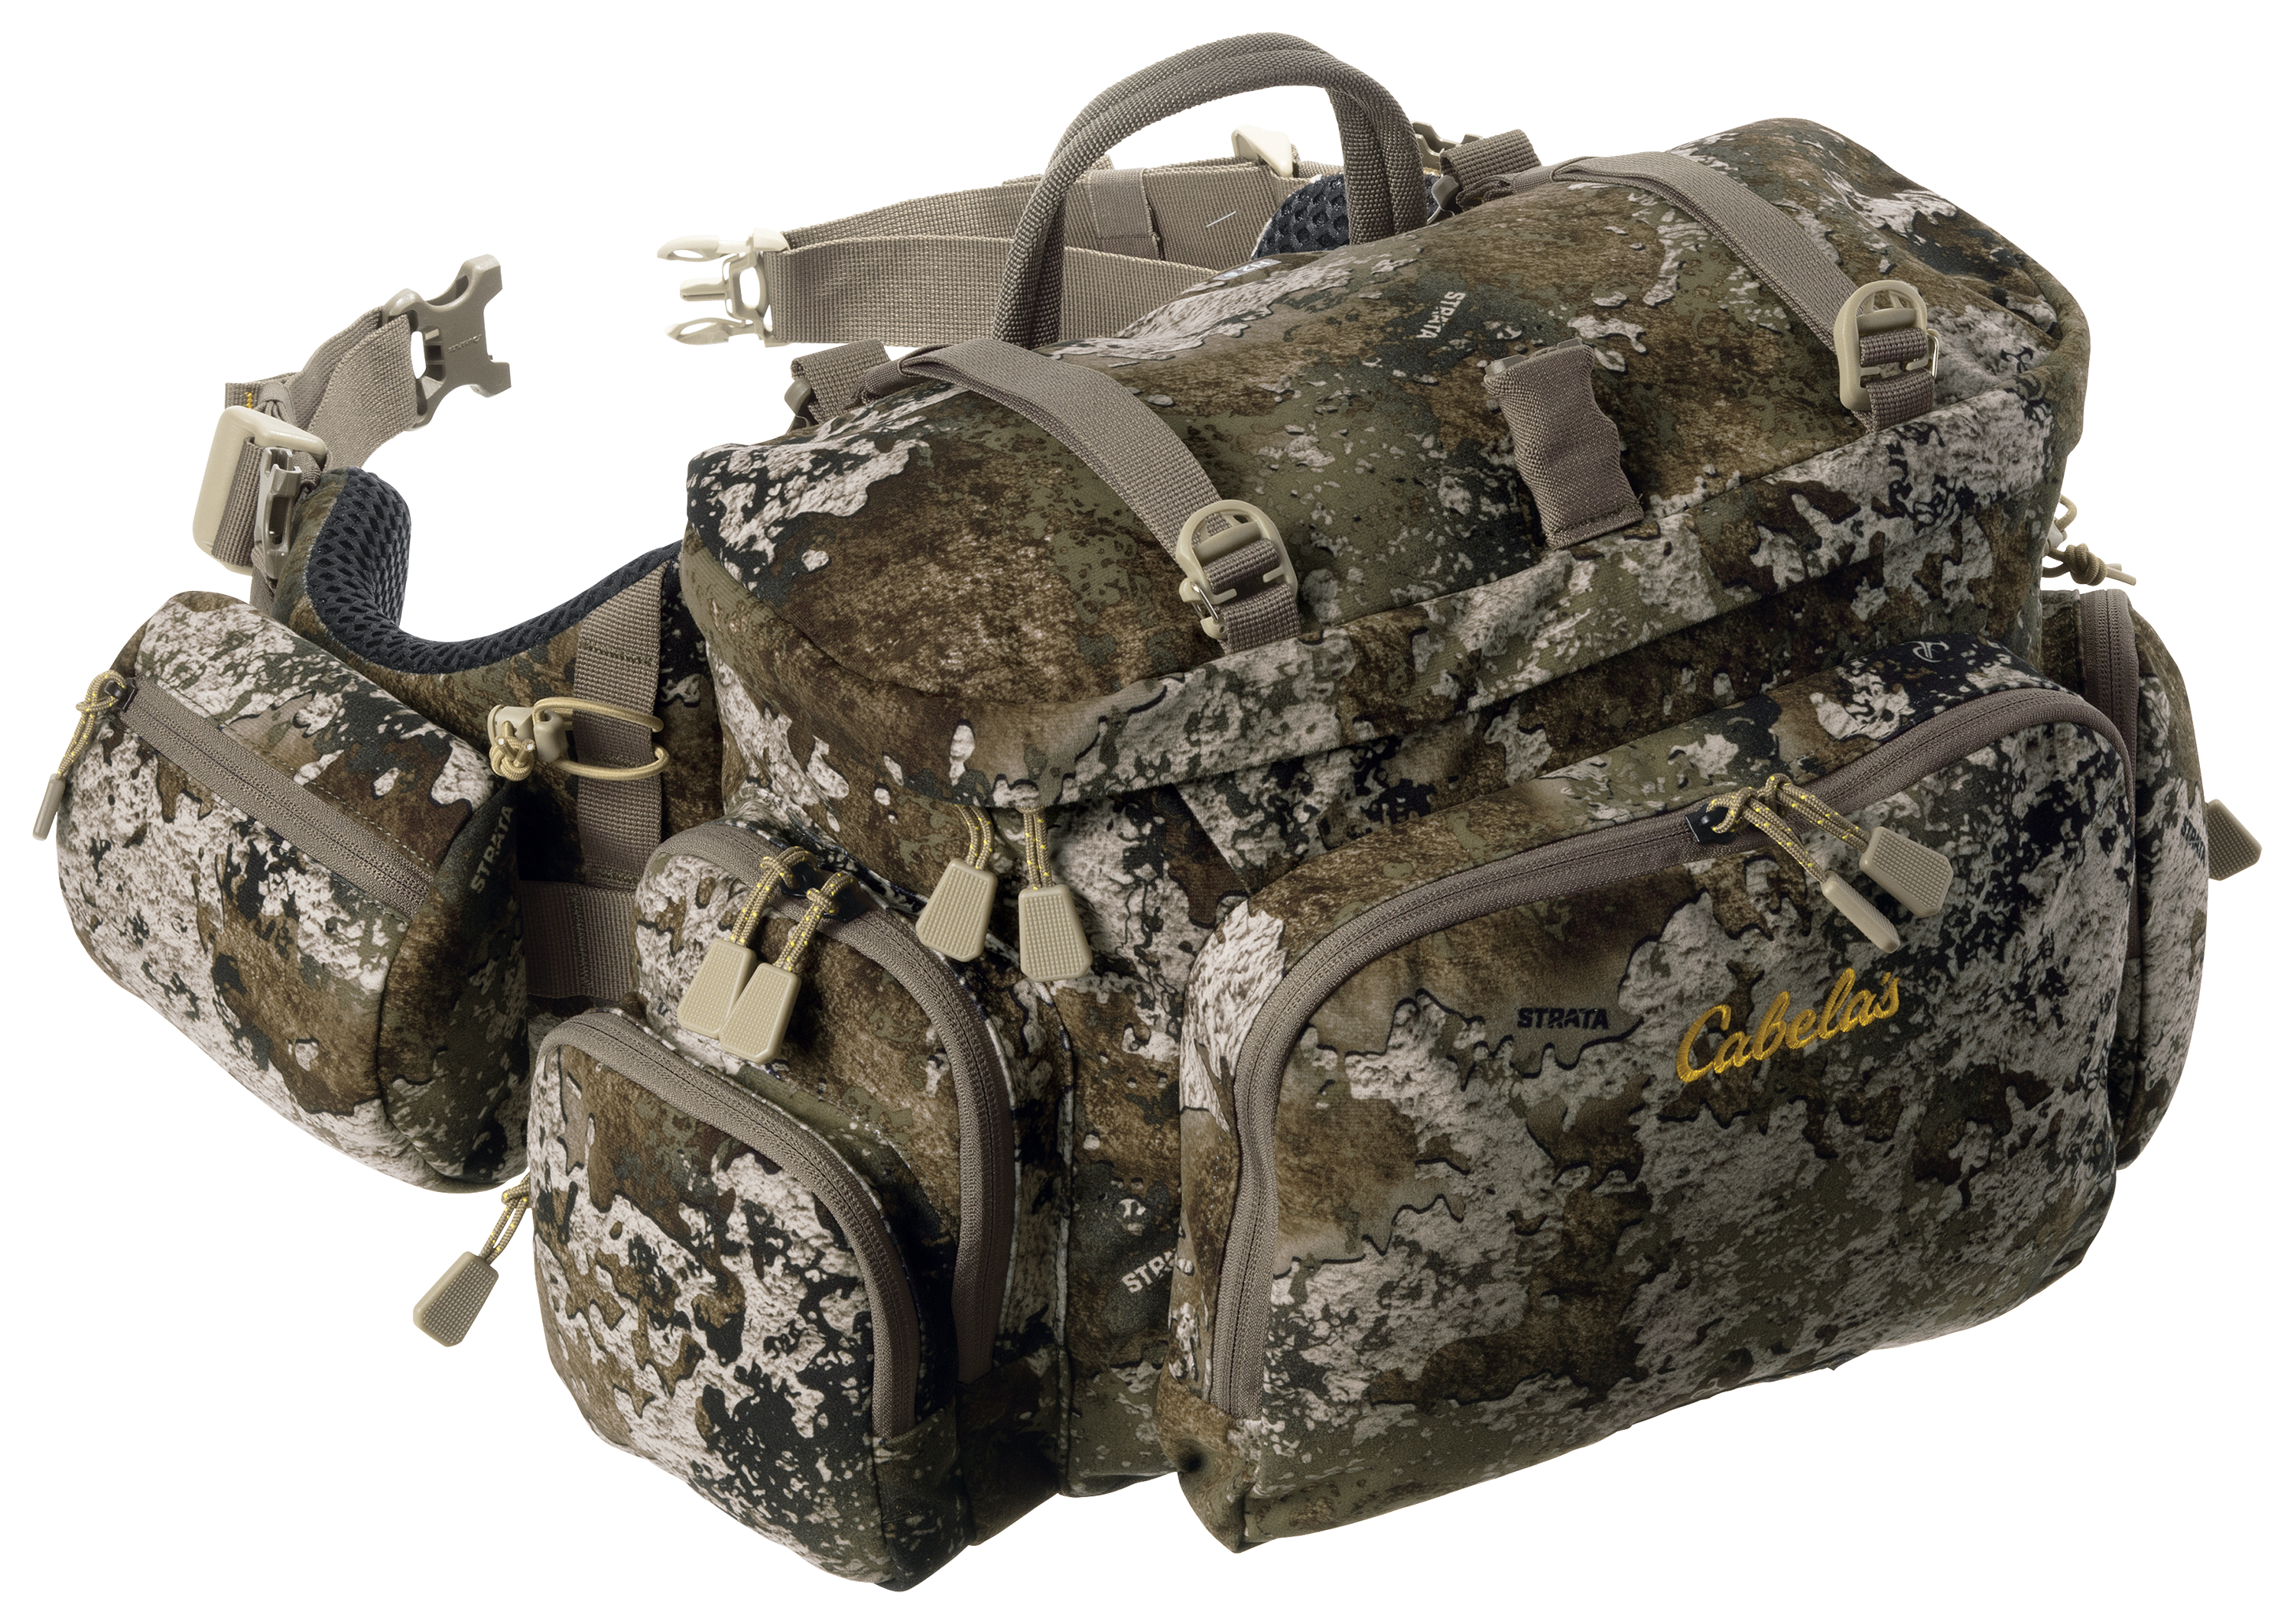 Cabela's Small Camo Bag Hunting Fishing Gear Catch-All No Shoulder